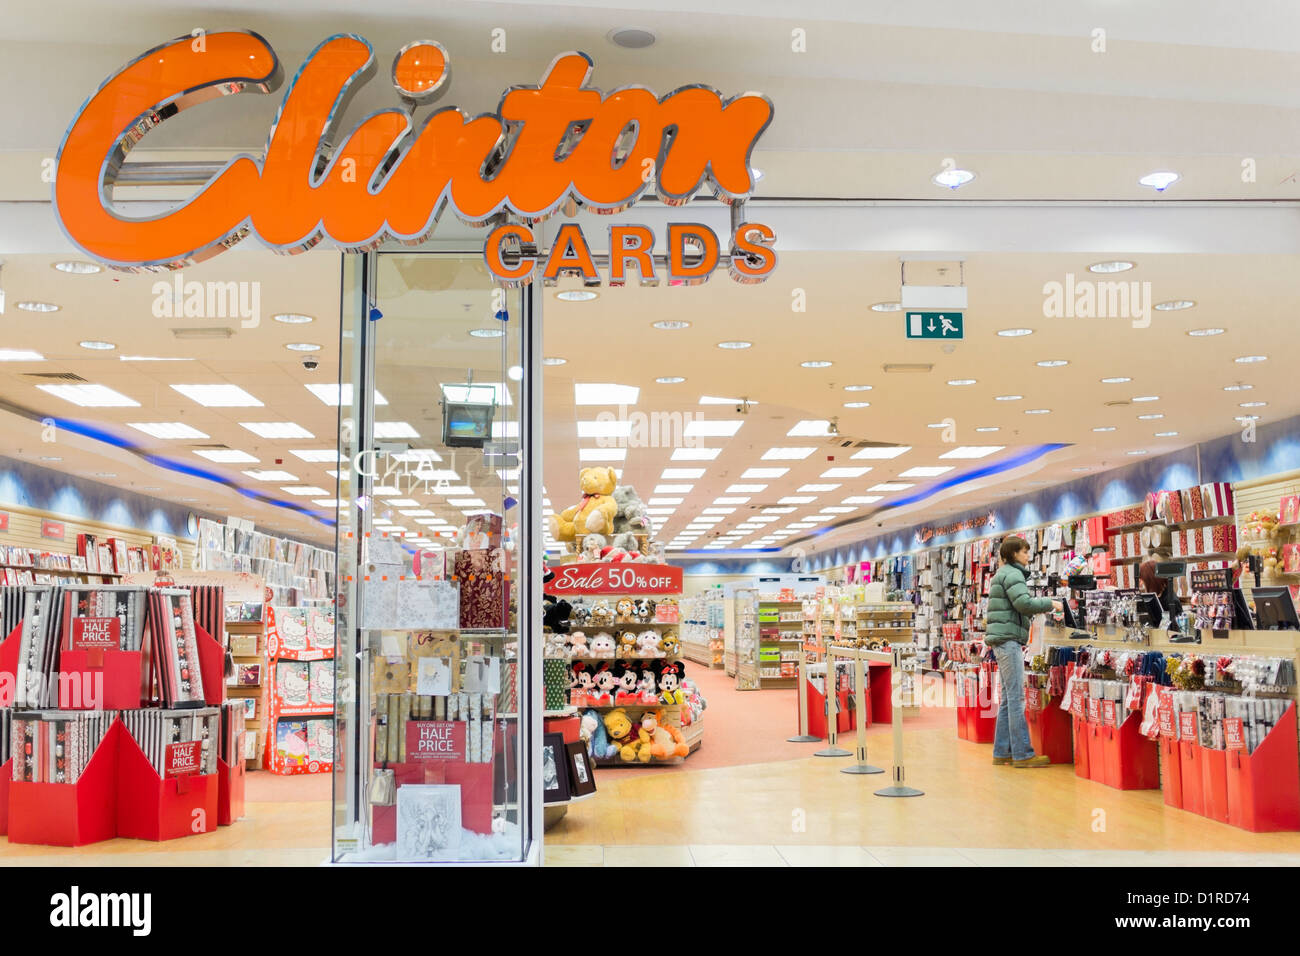 Clinton Cards shop front at the Metrocentre of Clinton Cards. Stock Photo